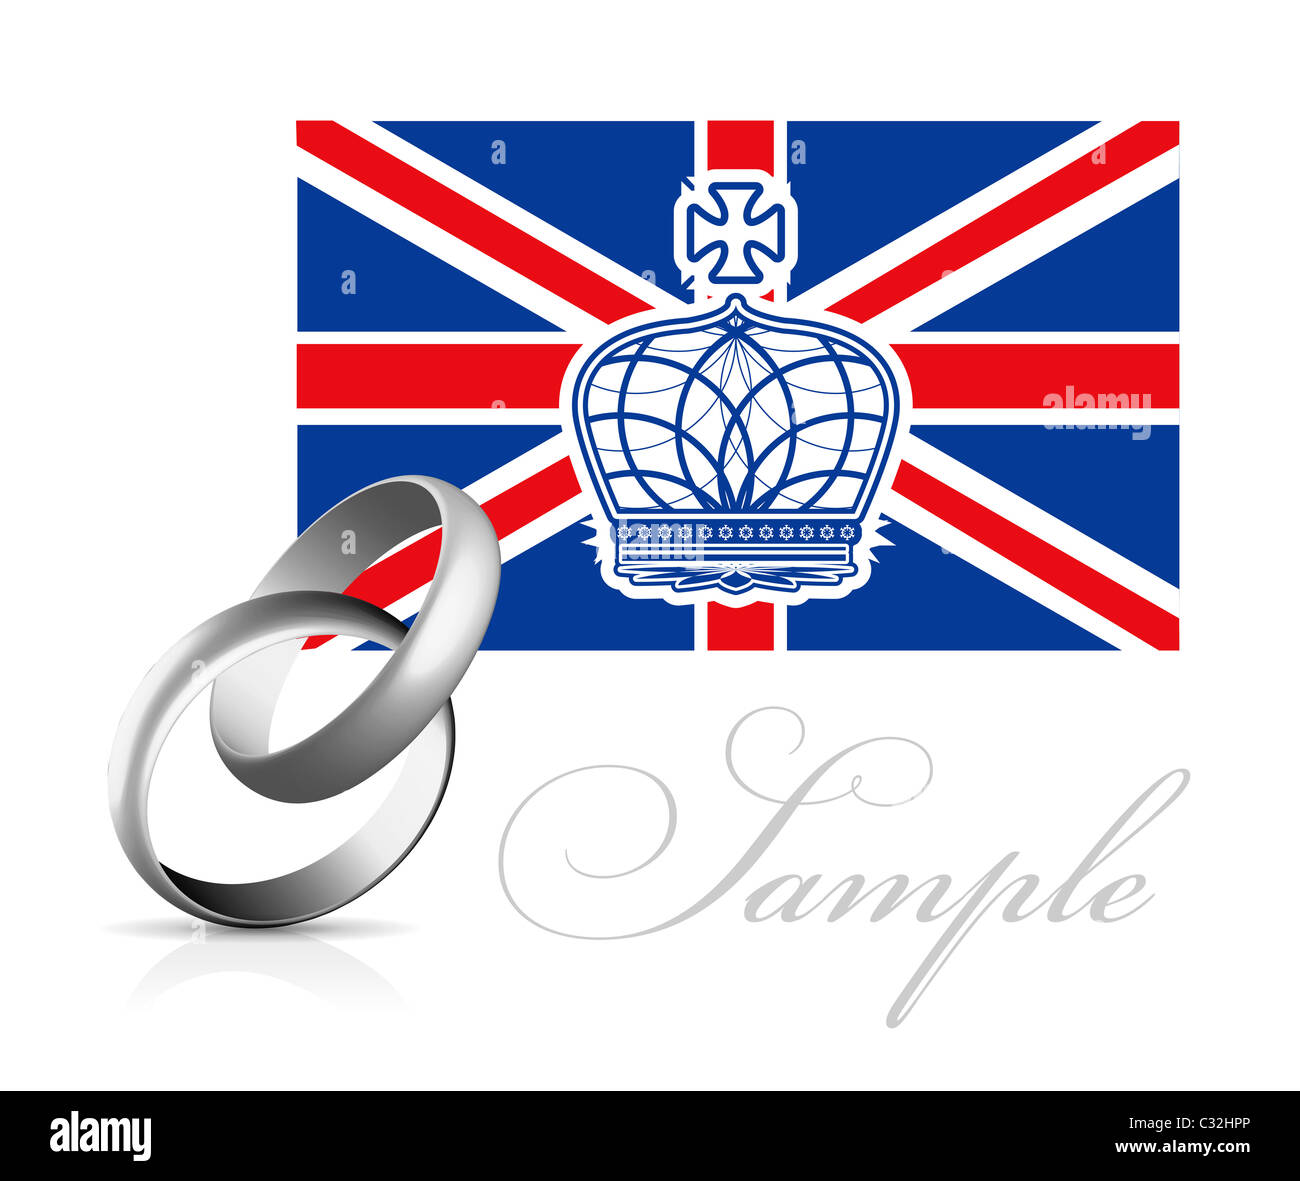 Royal wedding of Prince William and Kate Middleton. Vector illustration Stock Photo